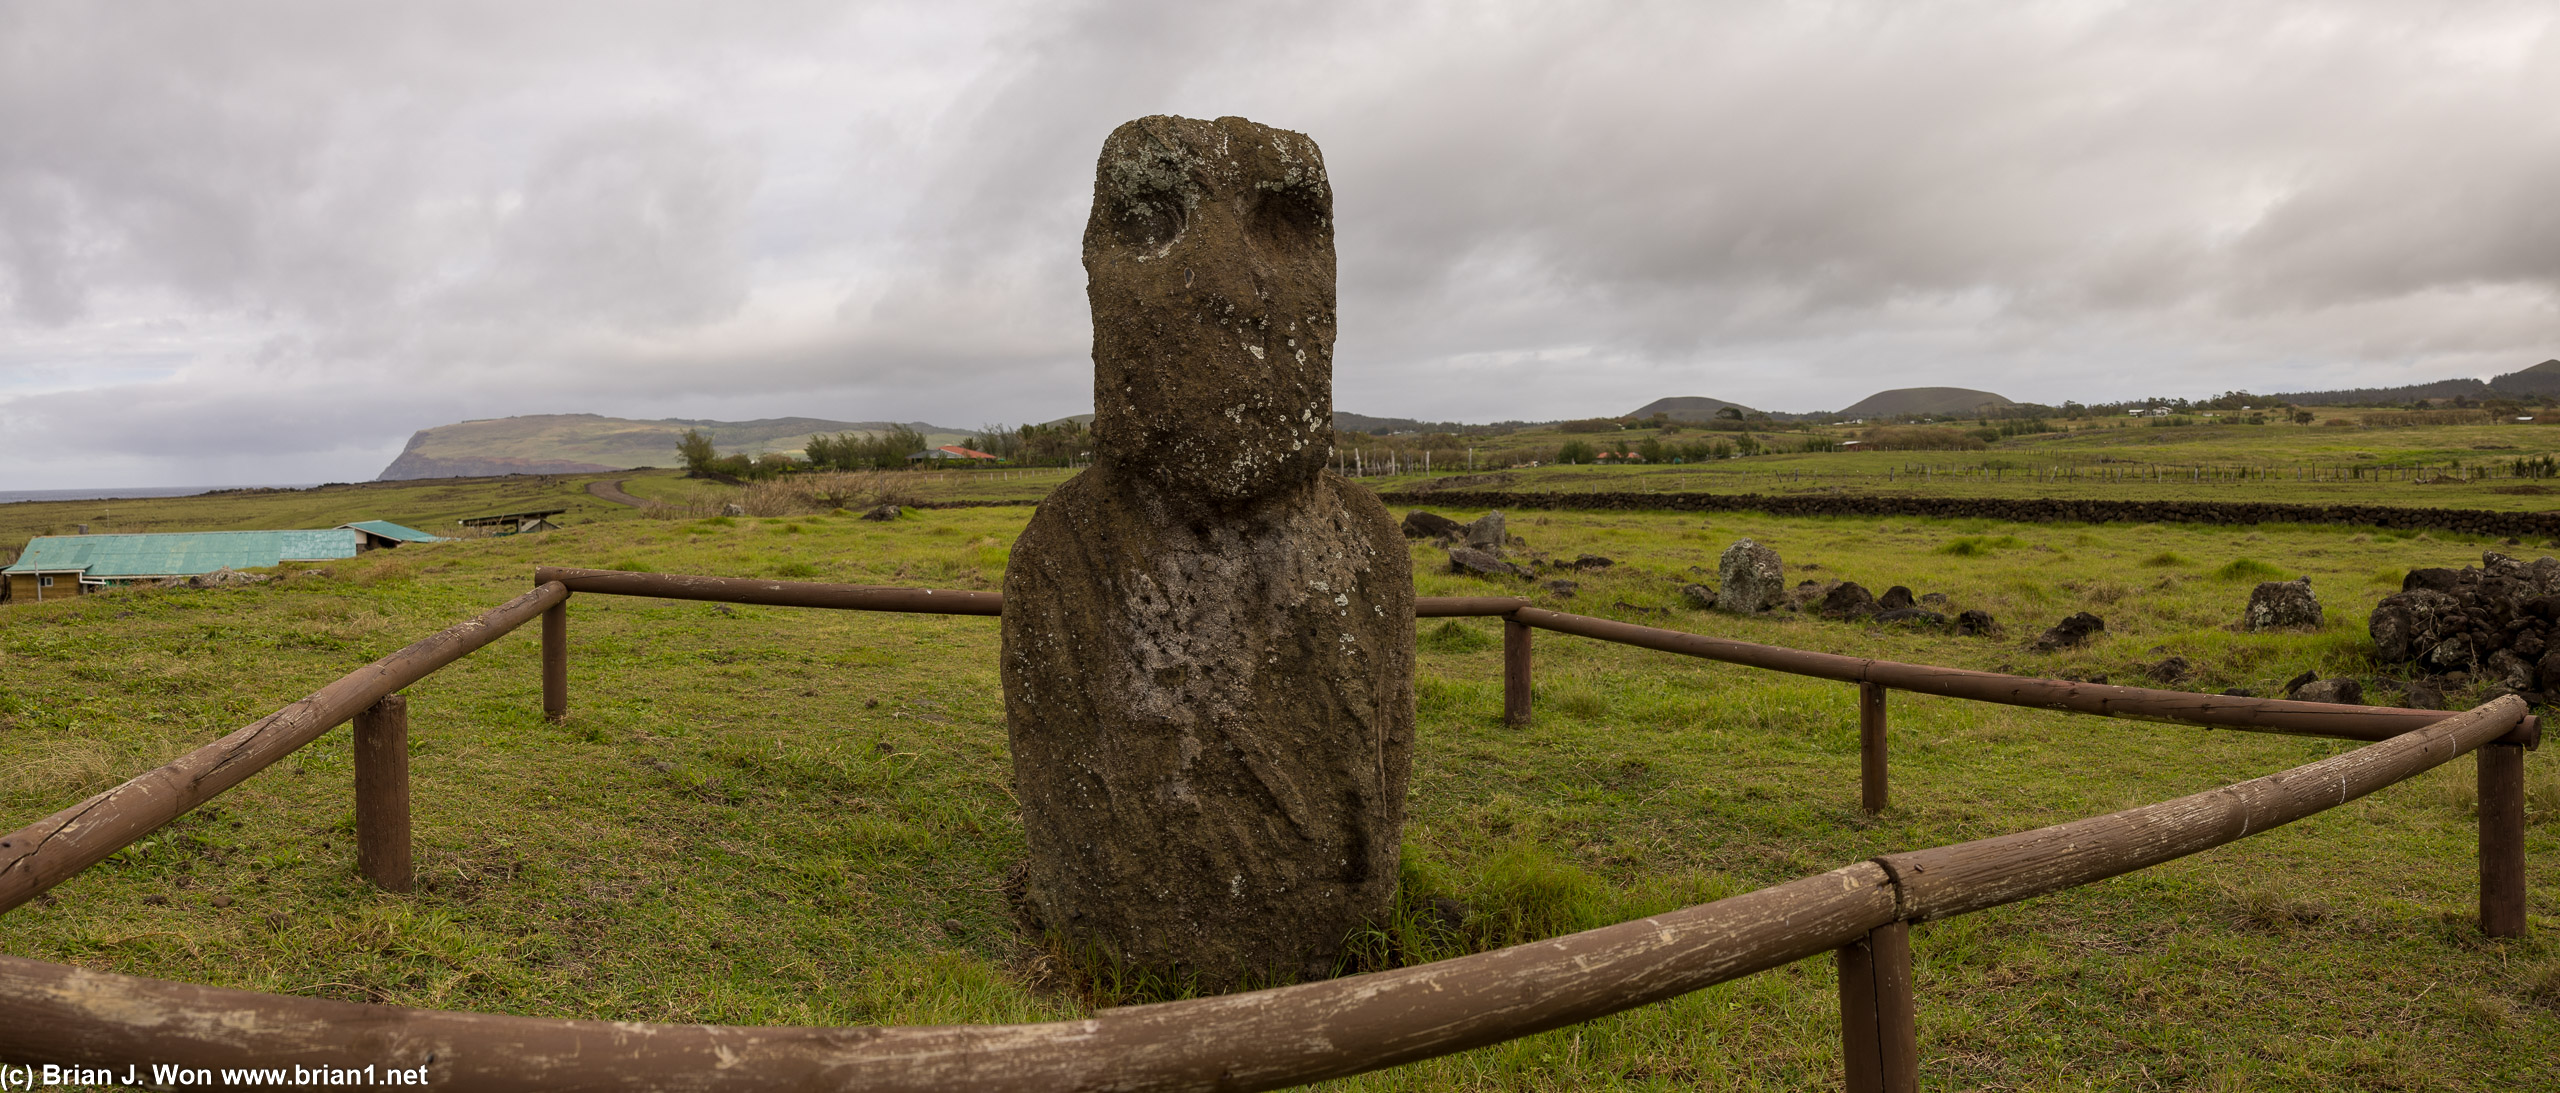 Some drunk people raised this moai from the ground several decades ago.